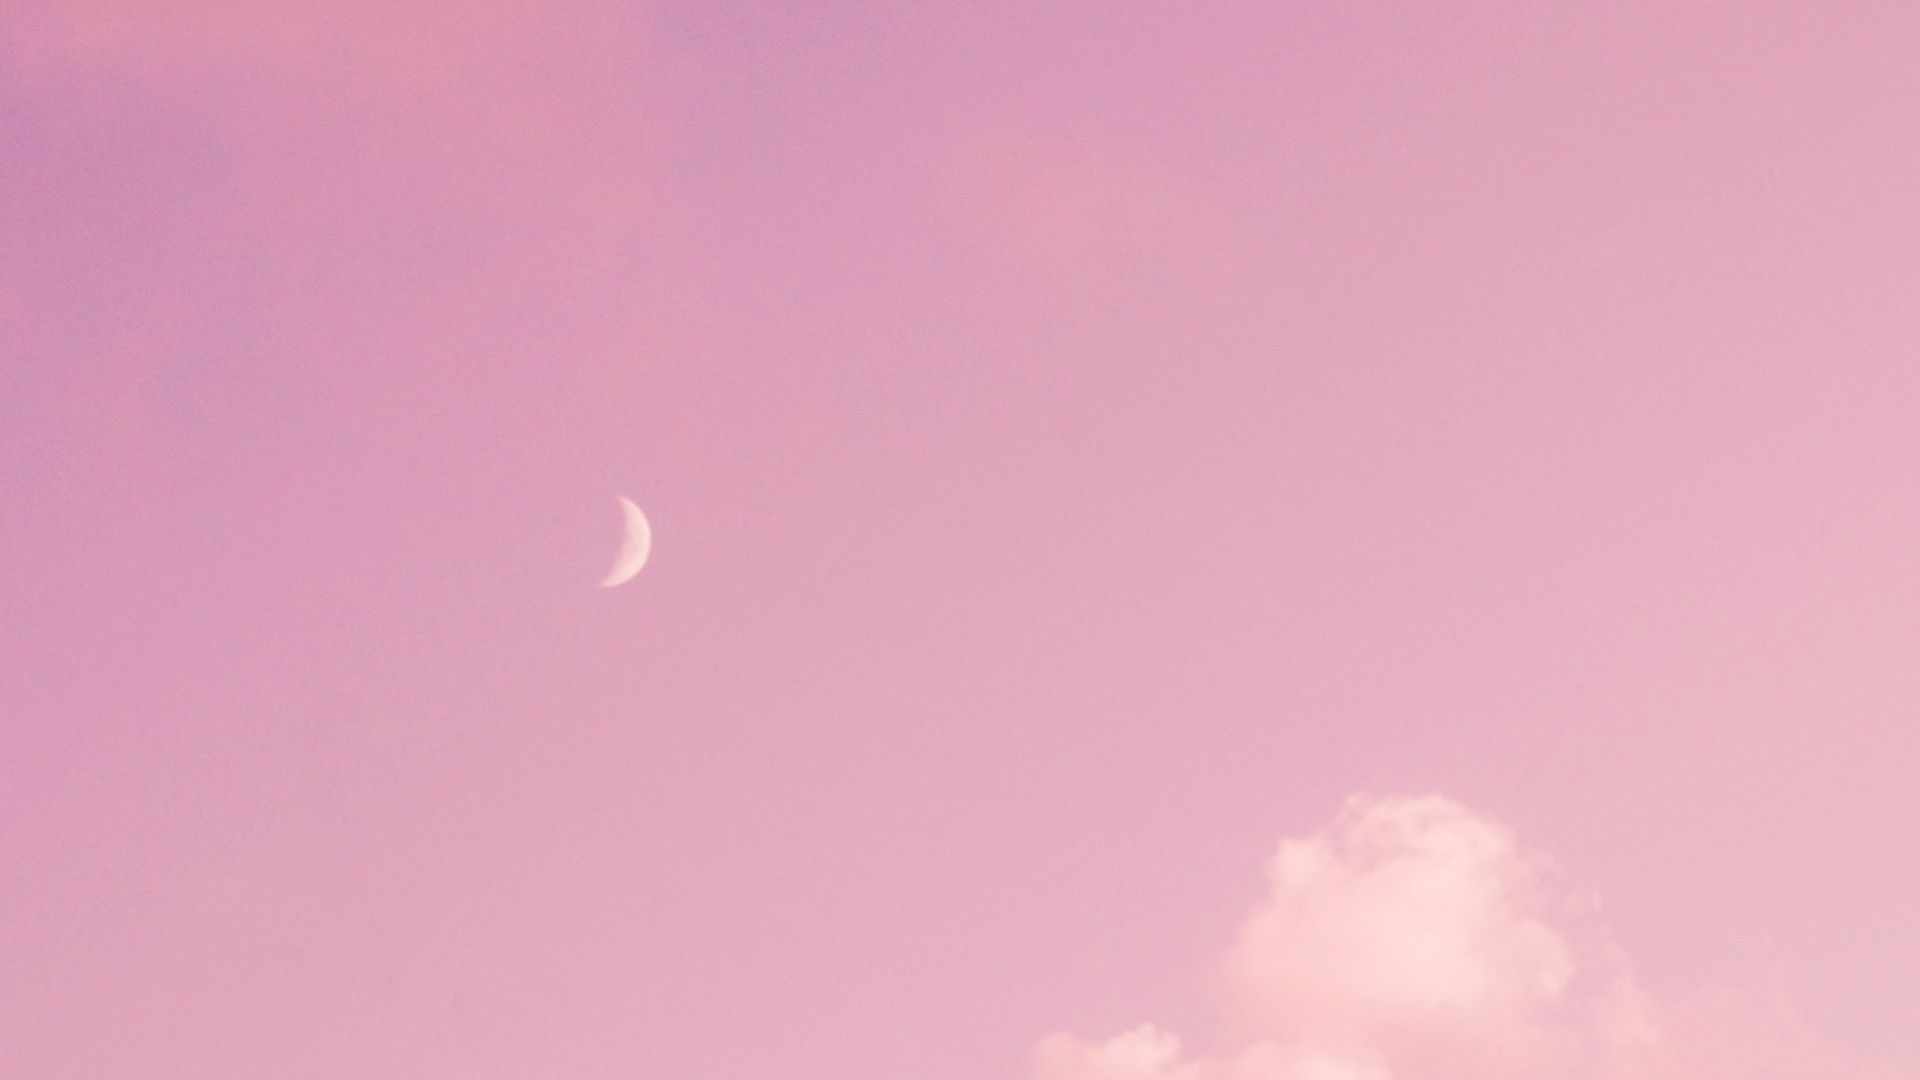 Download wallpaper 1920x1080 moon, pink, clouds, sky full hd, hdtv, fhd, 1080p HD background